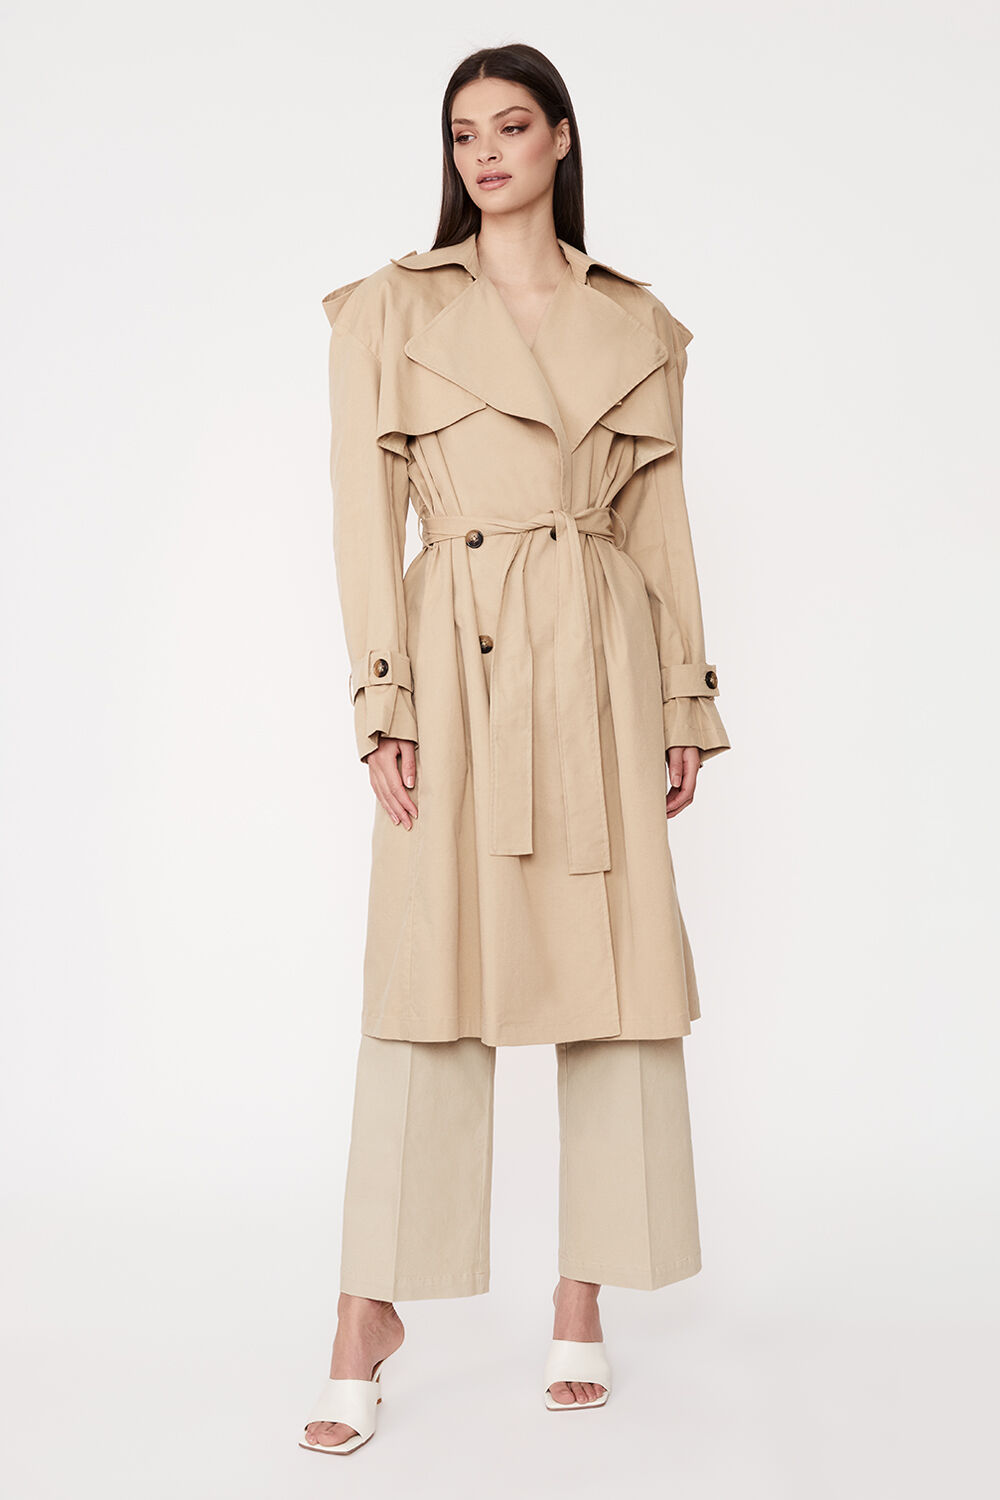 THE OVERSIZED TRENCH in colour TAN